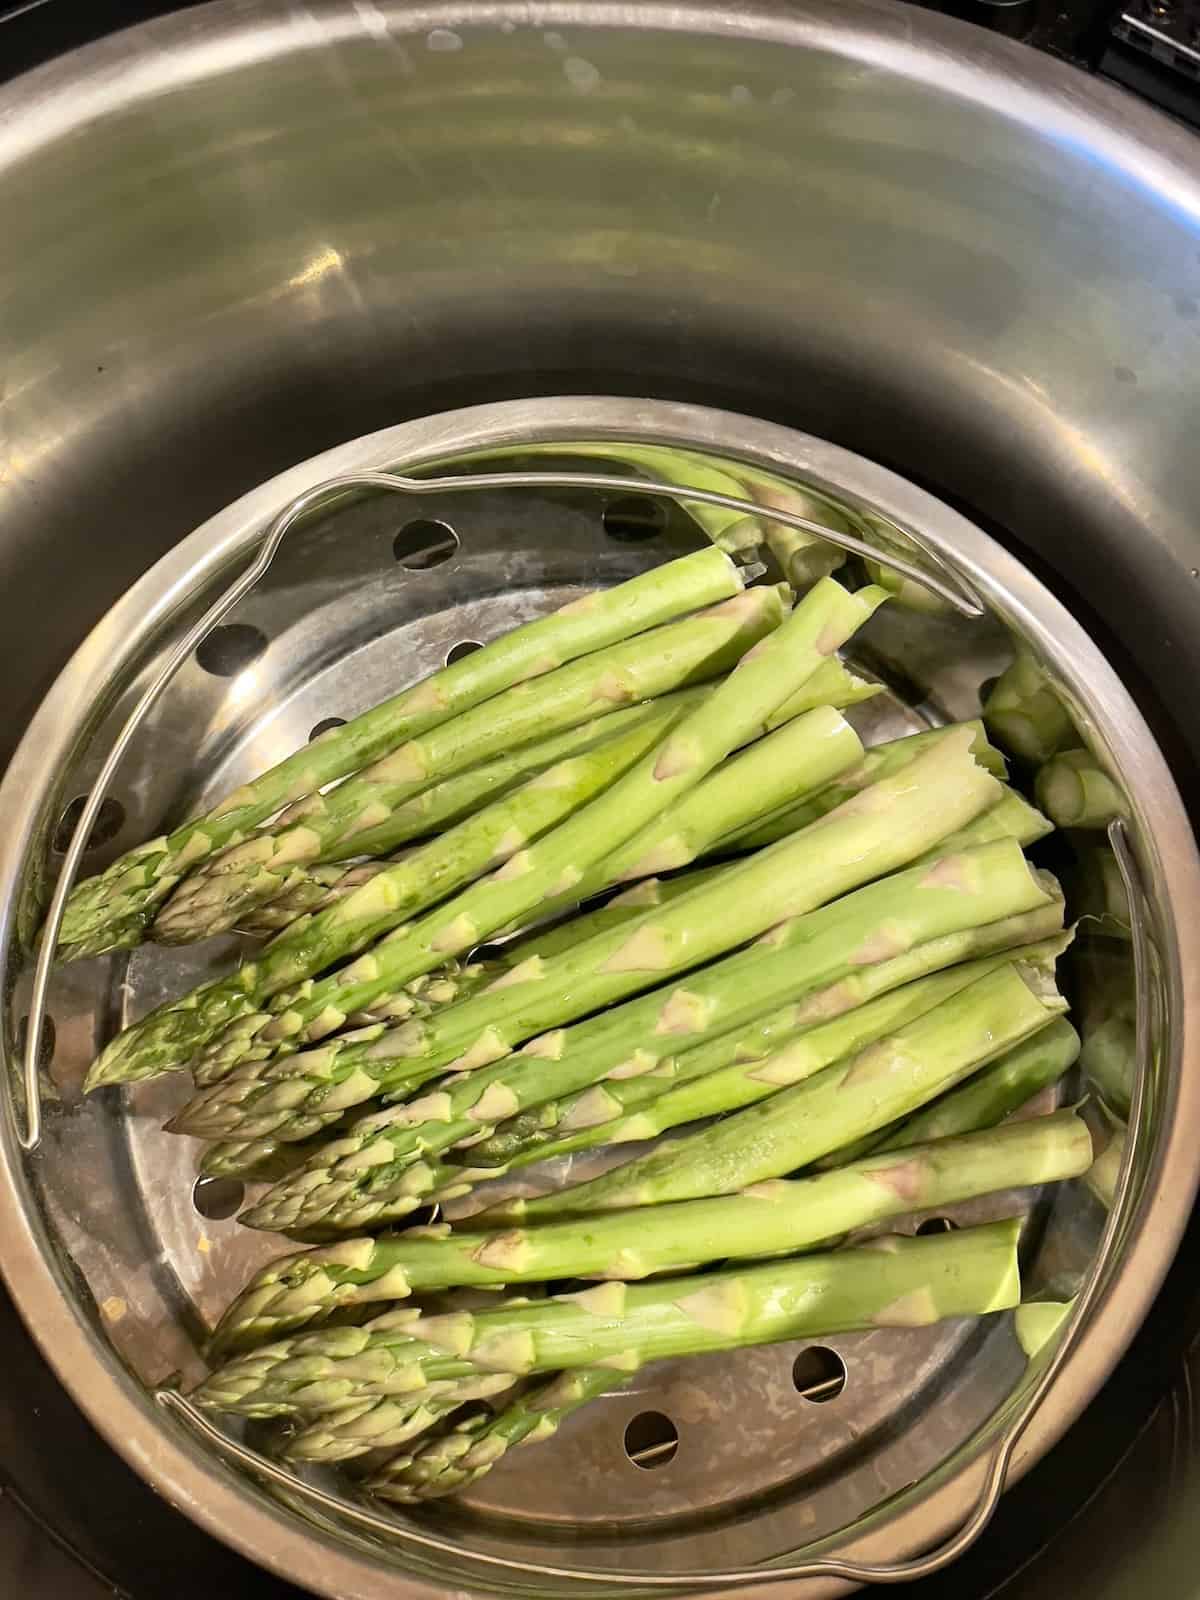 uncooked asparagus spears in the steamer basket of the instant pot